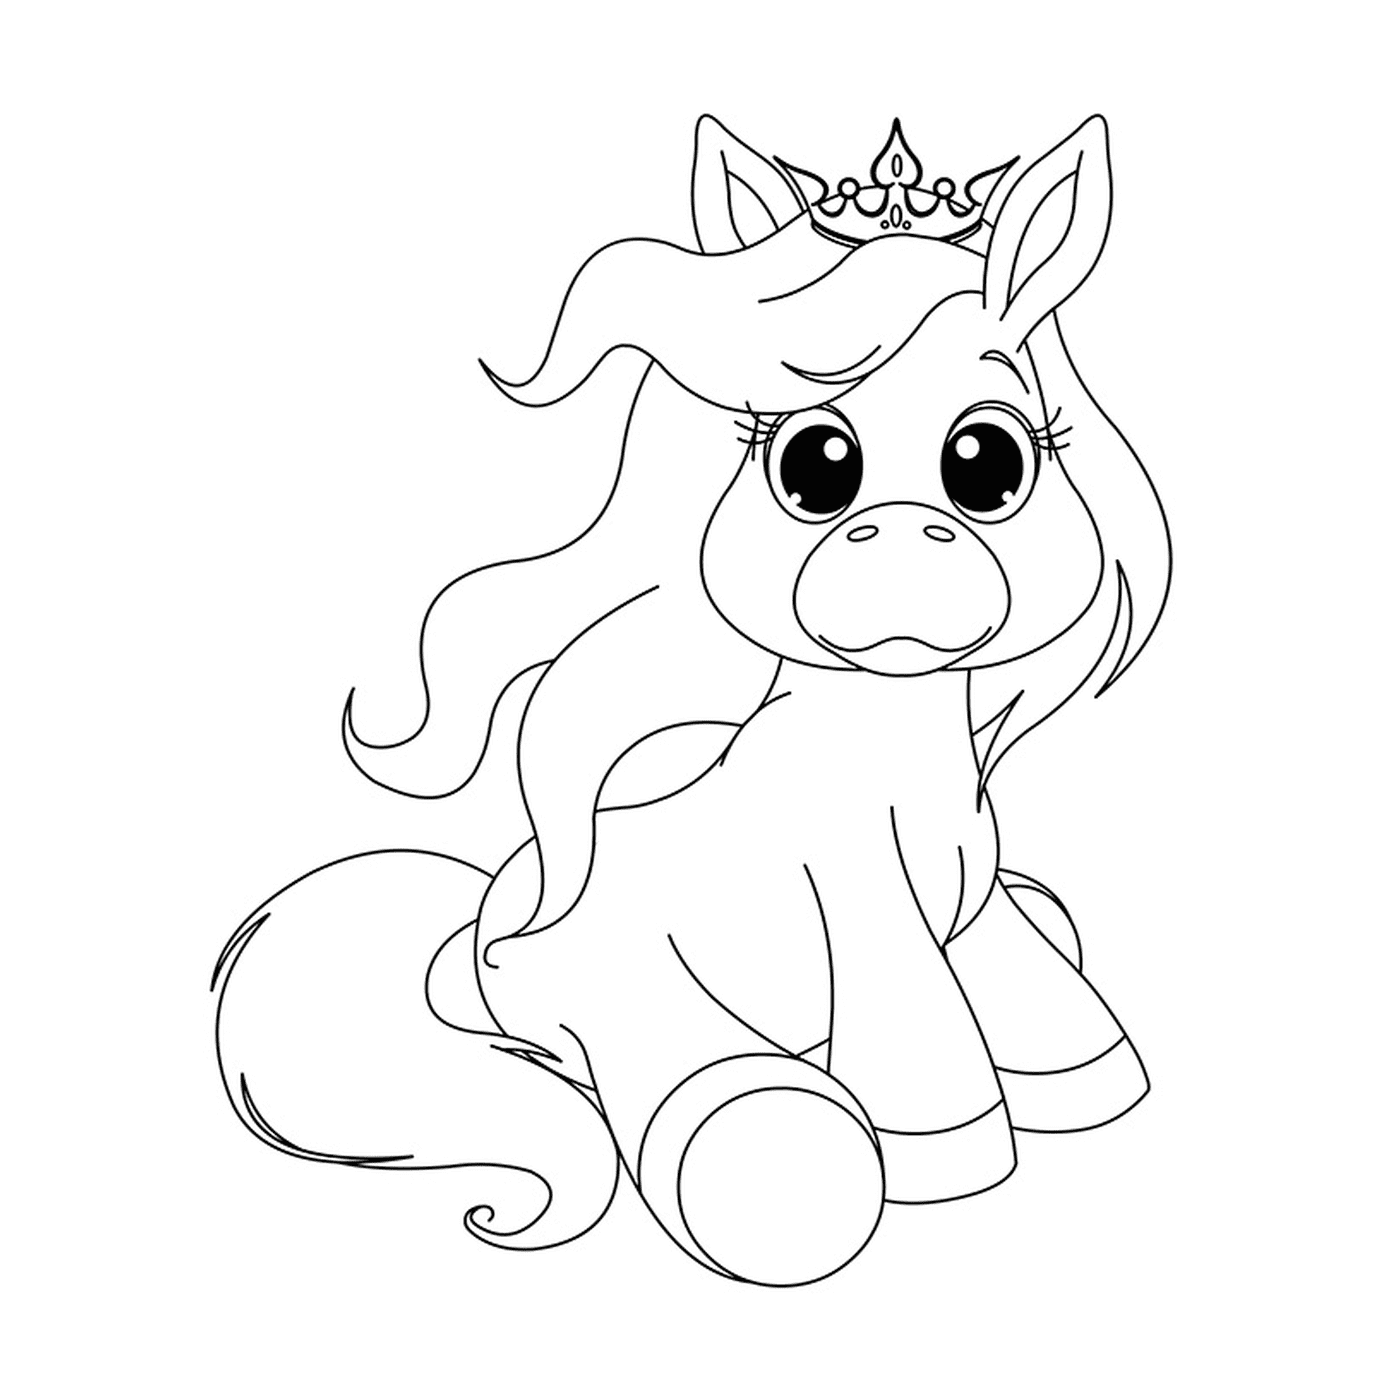  A pony with a crown on its head 